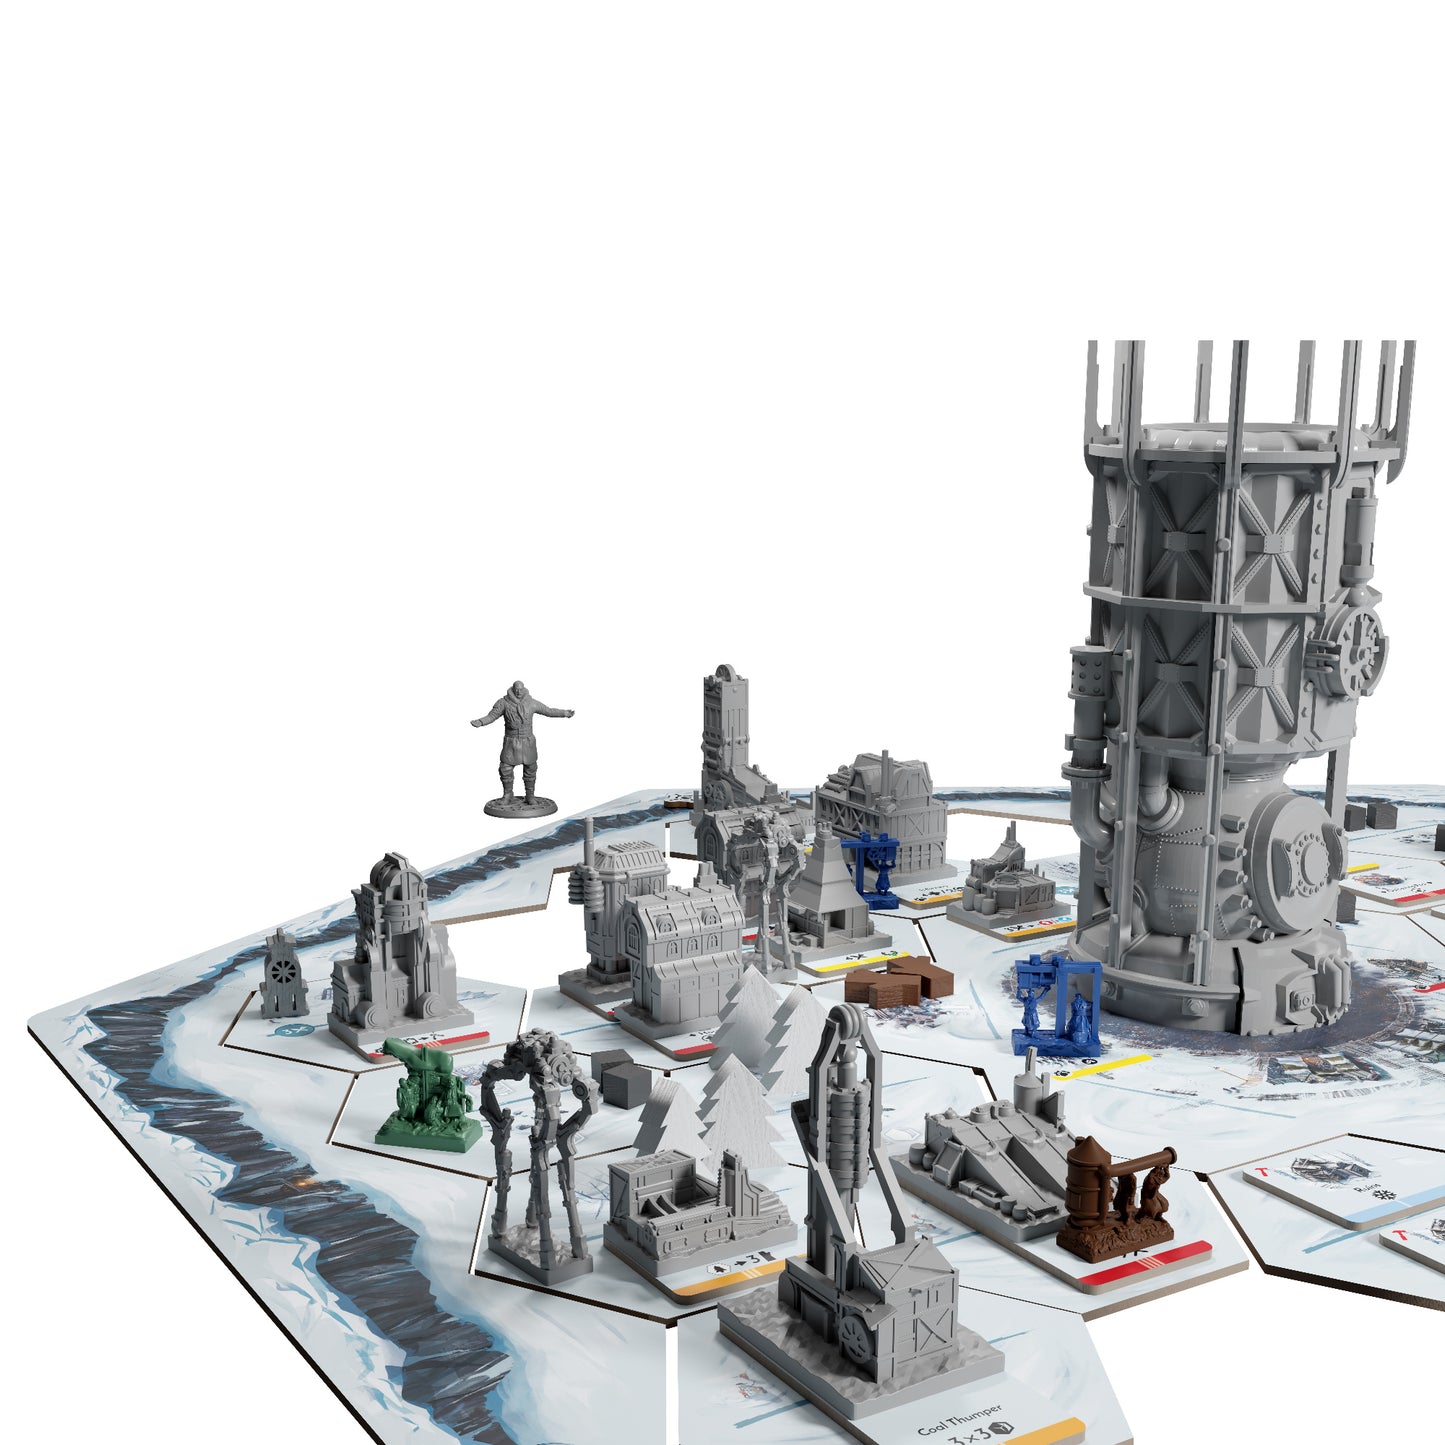 Frostpunk: The Board Game: Miniatures